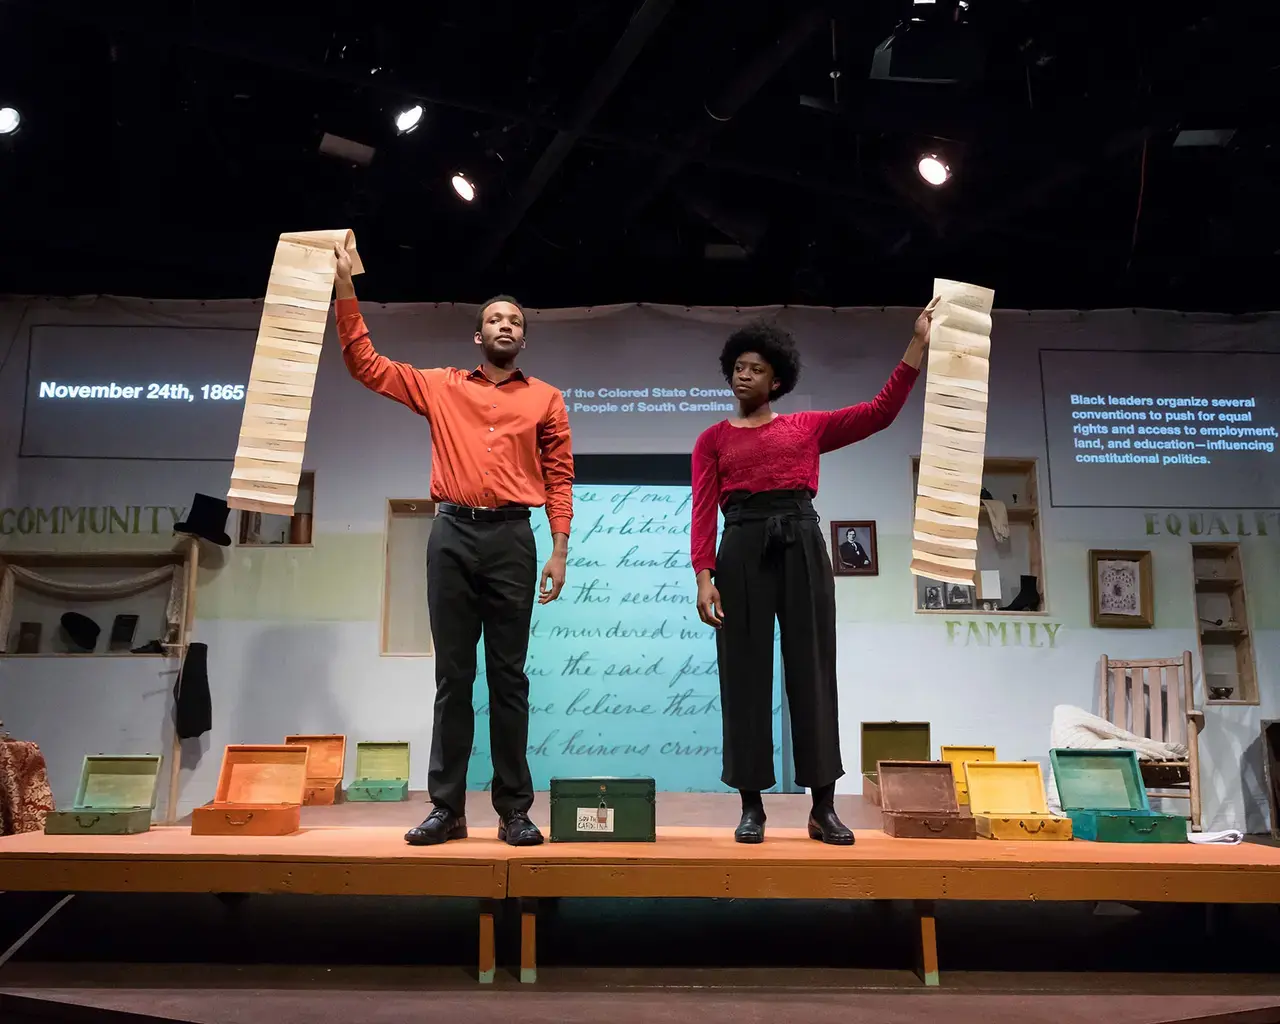 Reconstruction and the Fourteenth Amendment Project workshop performance. Performers Brandon Pierce and Brett Robinson display the list of names of freed people in South Carolina, petitioning the federal government for equal rights. Photo by Daniel Kontz.